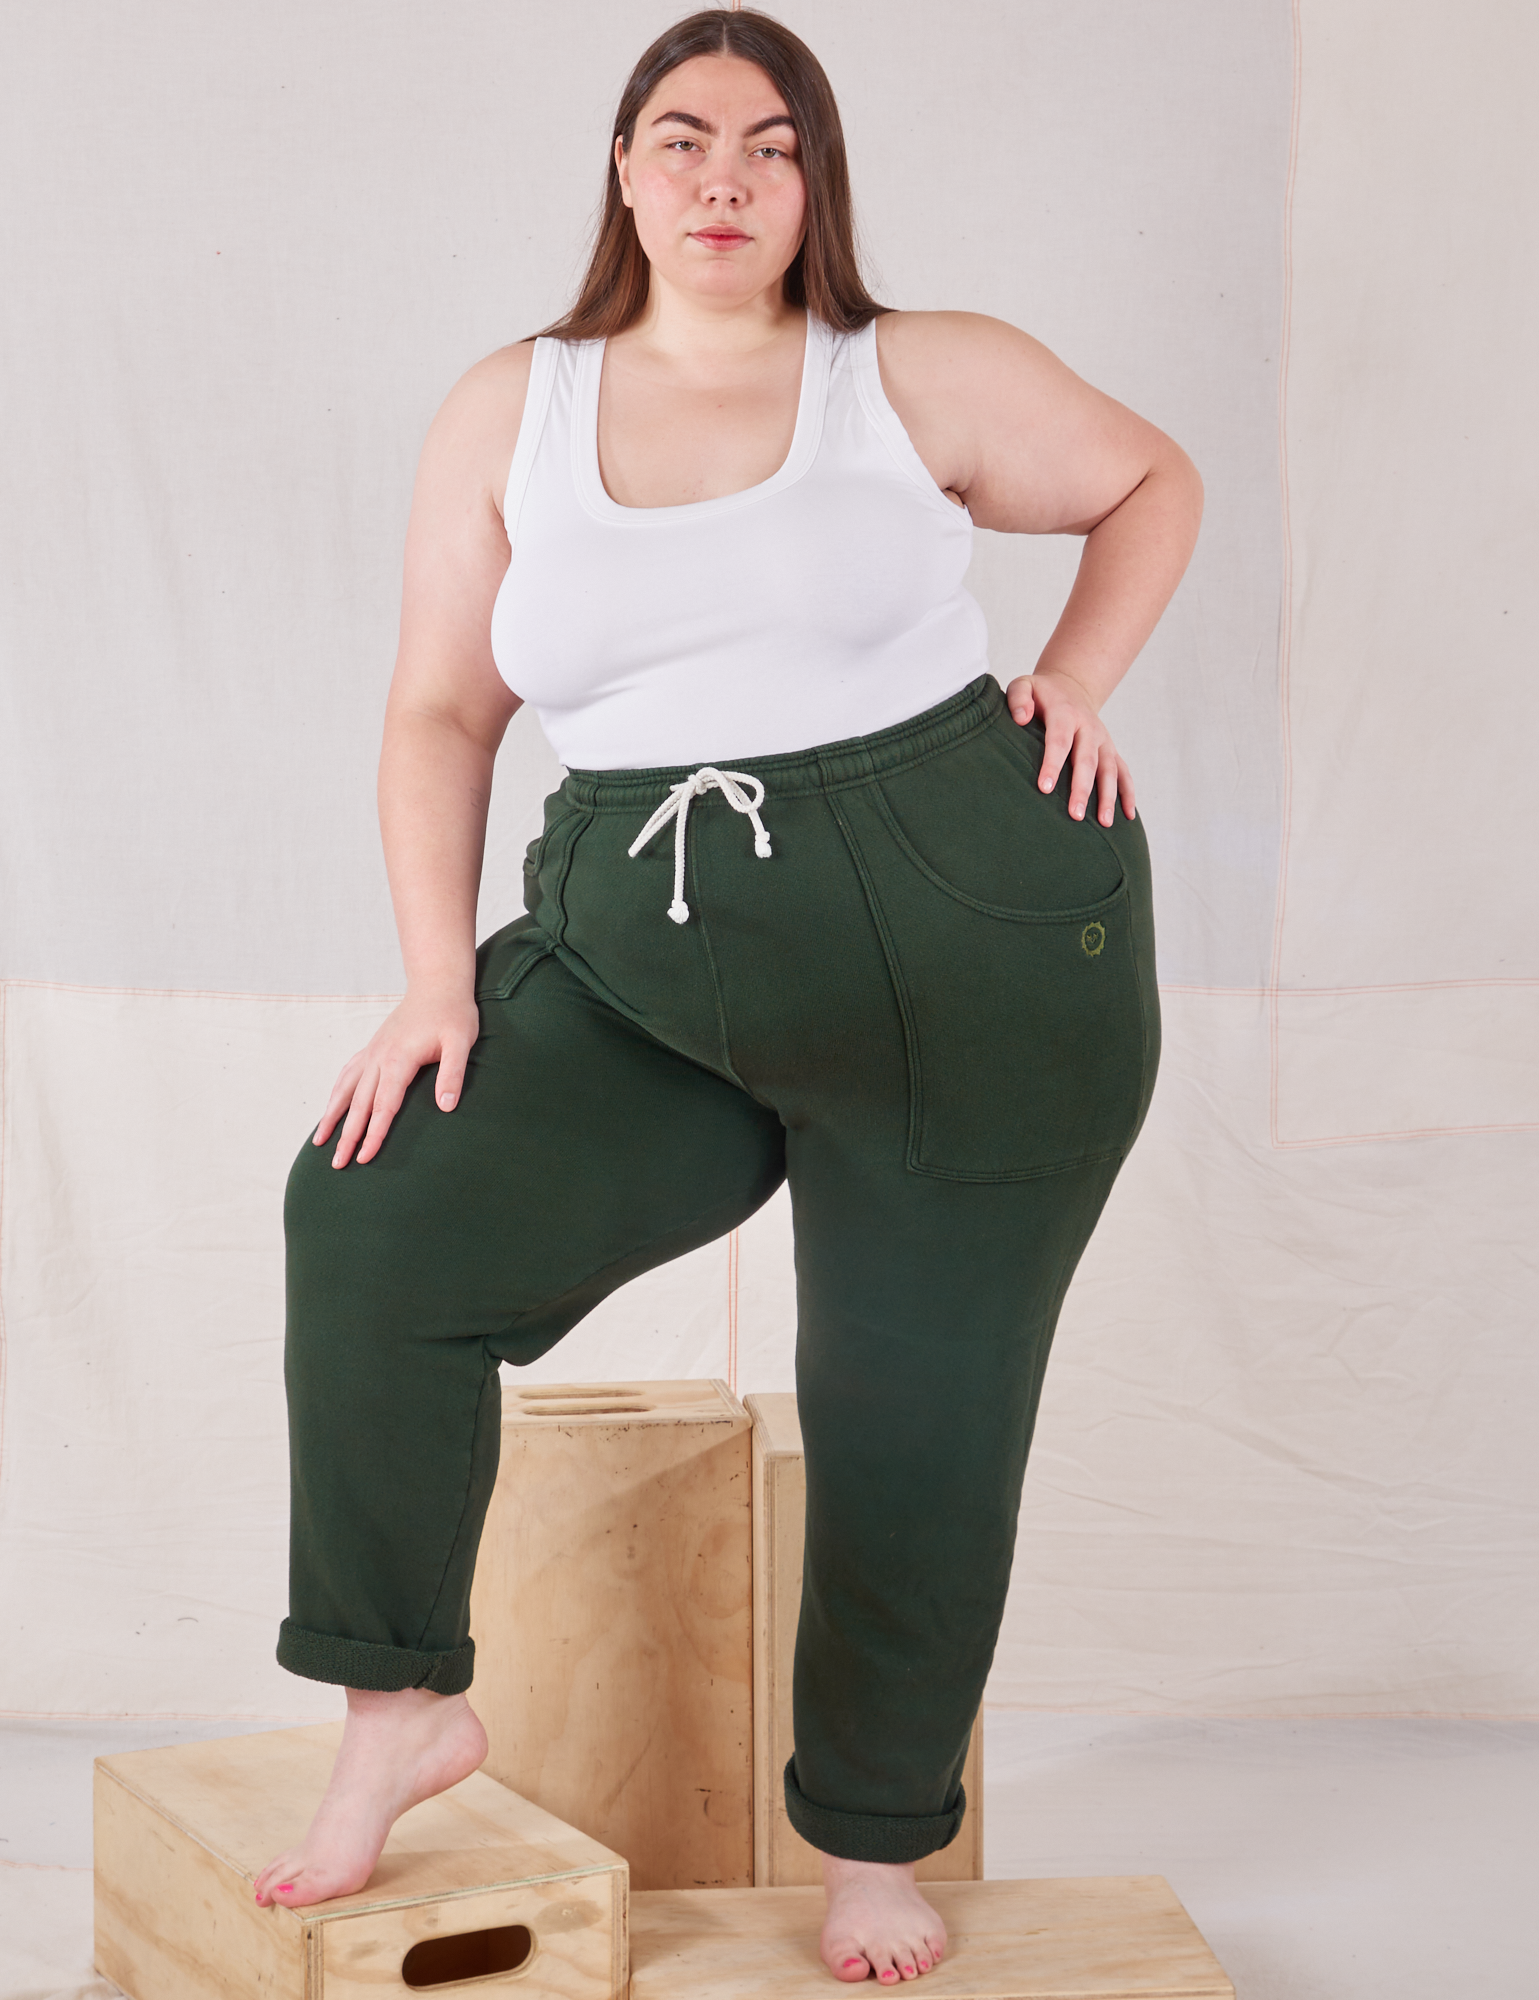 Marielena is 5'8" and wearing 1XL Rolled Cuff Sweat Pants in Swamp Green paired with Cropped Tank in vintage tee off-white